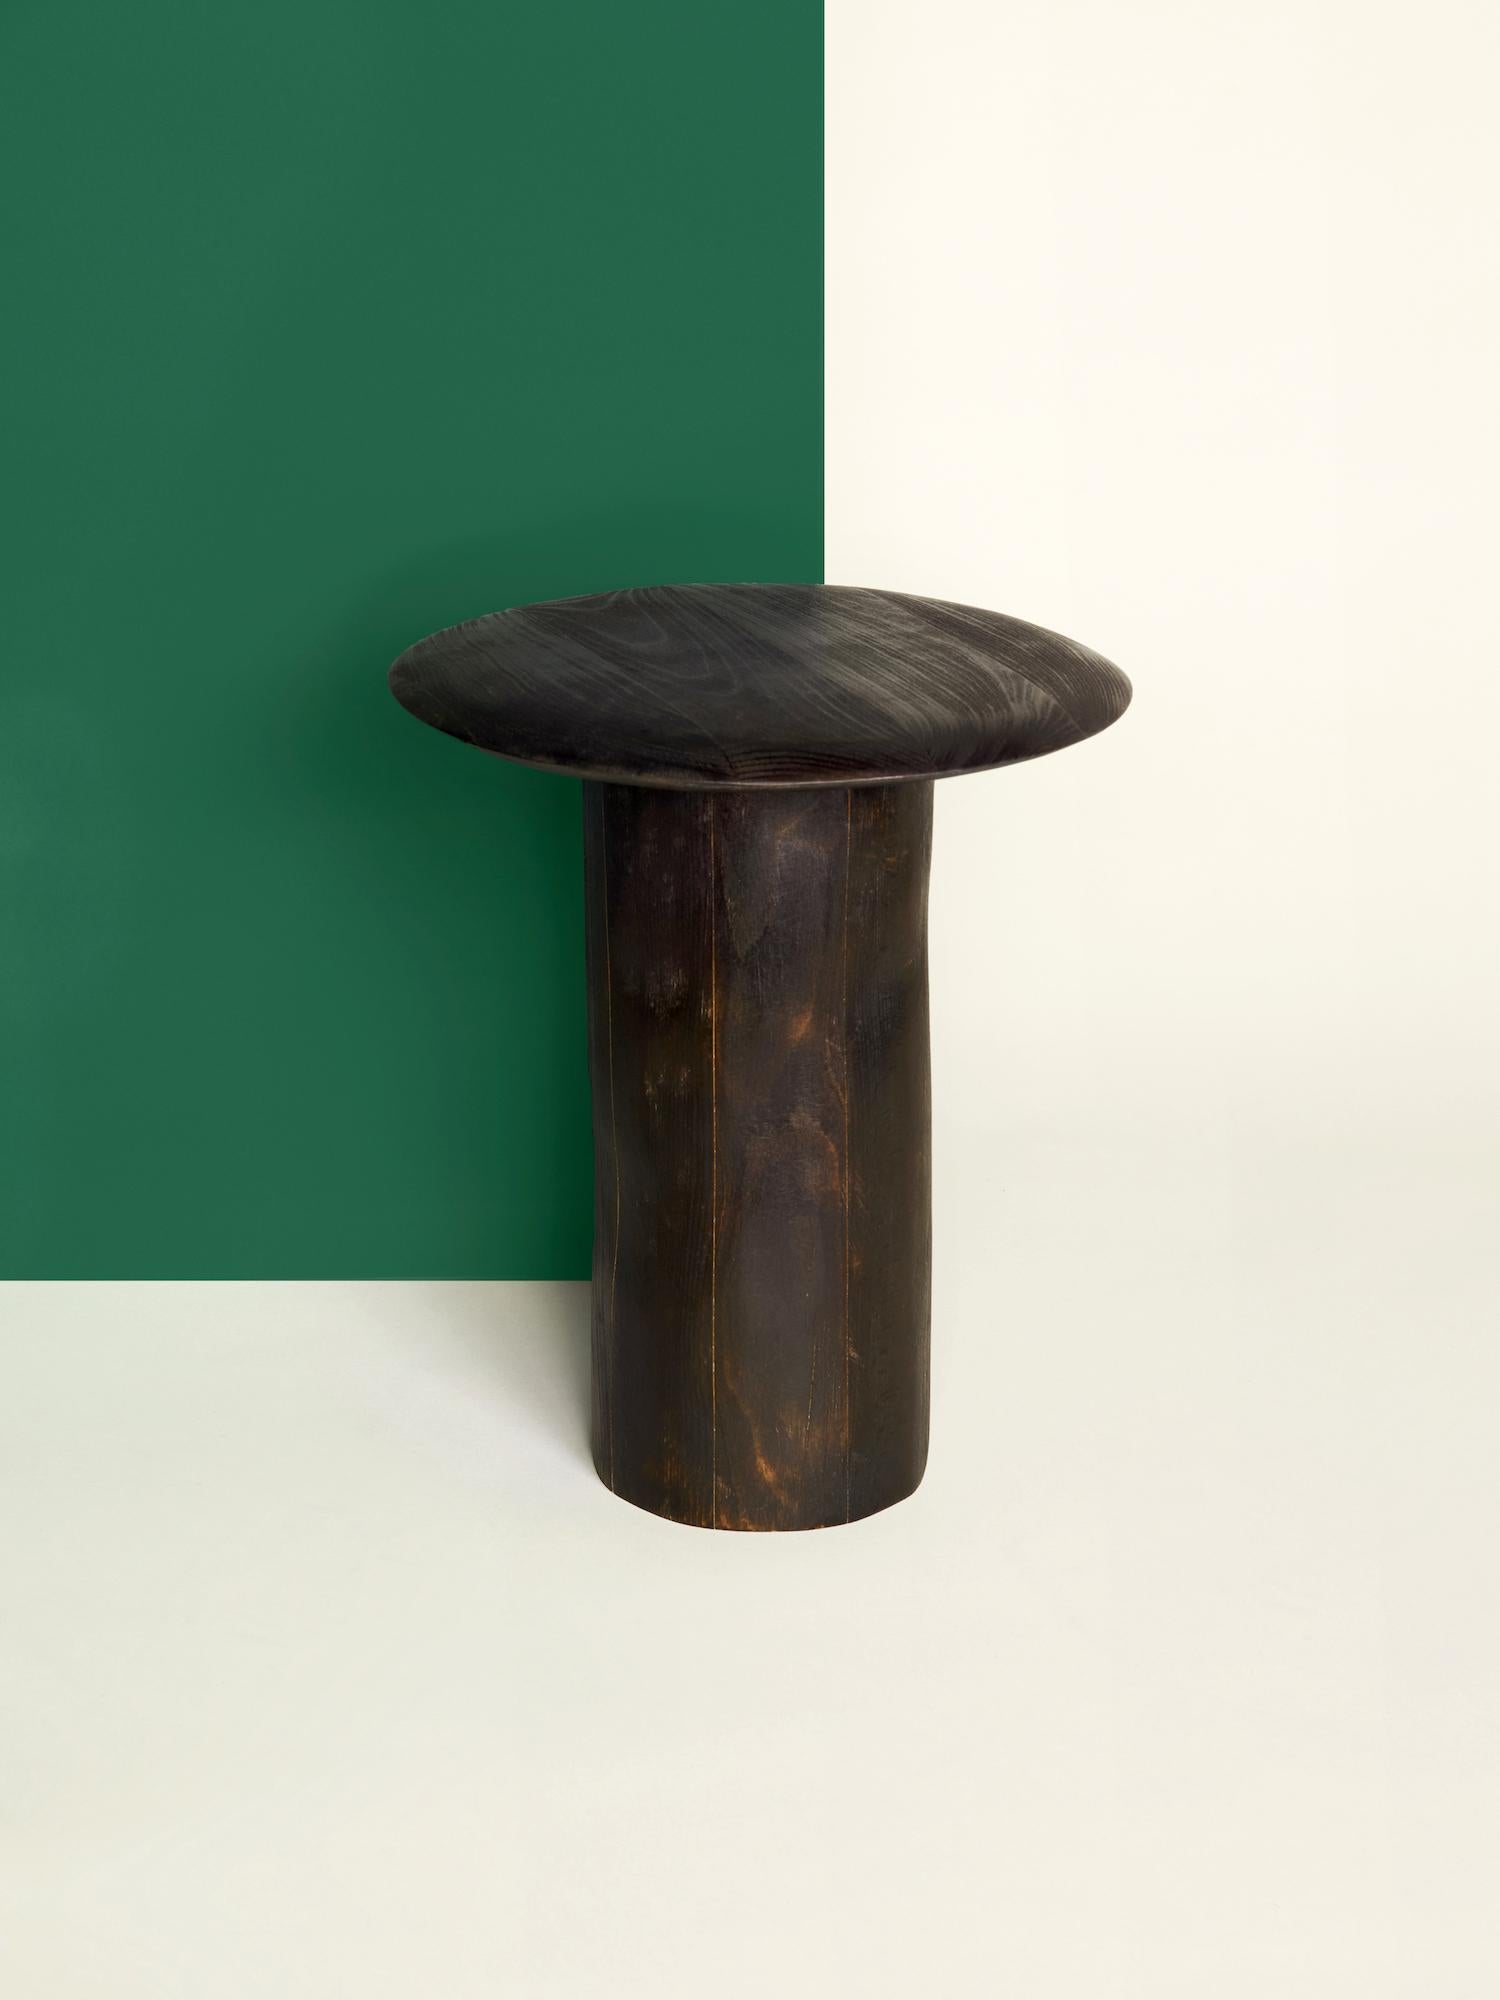 Dark sculptural side table pedestal - Albane Salmon
Dimensions: 36.5 x 31 x 31 cm
Sculpted, burnt and brushed beech
One of a kind.
Variations possible on demand

Each part of those pieces of furniture is hand shaped and
textured without using